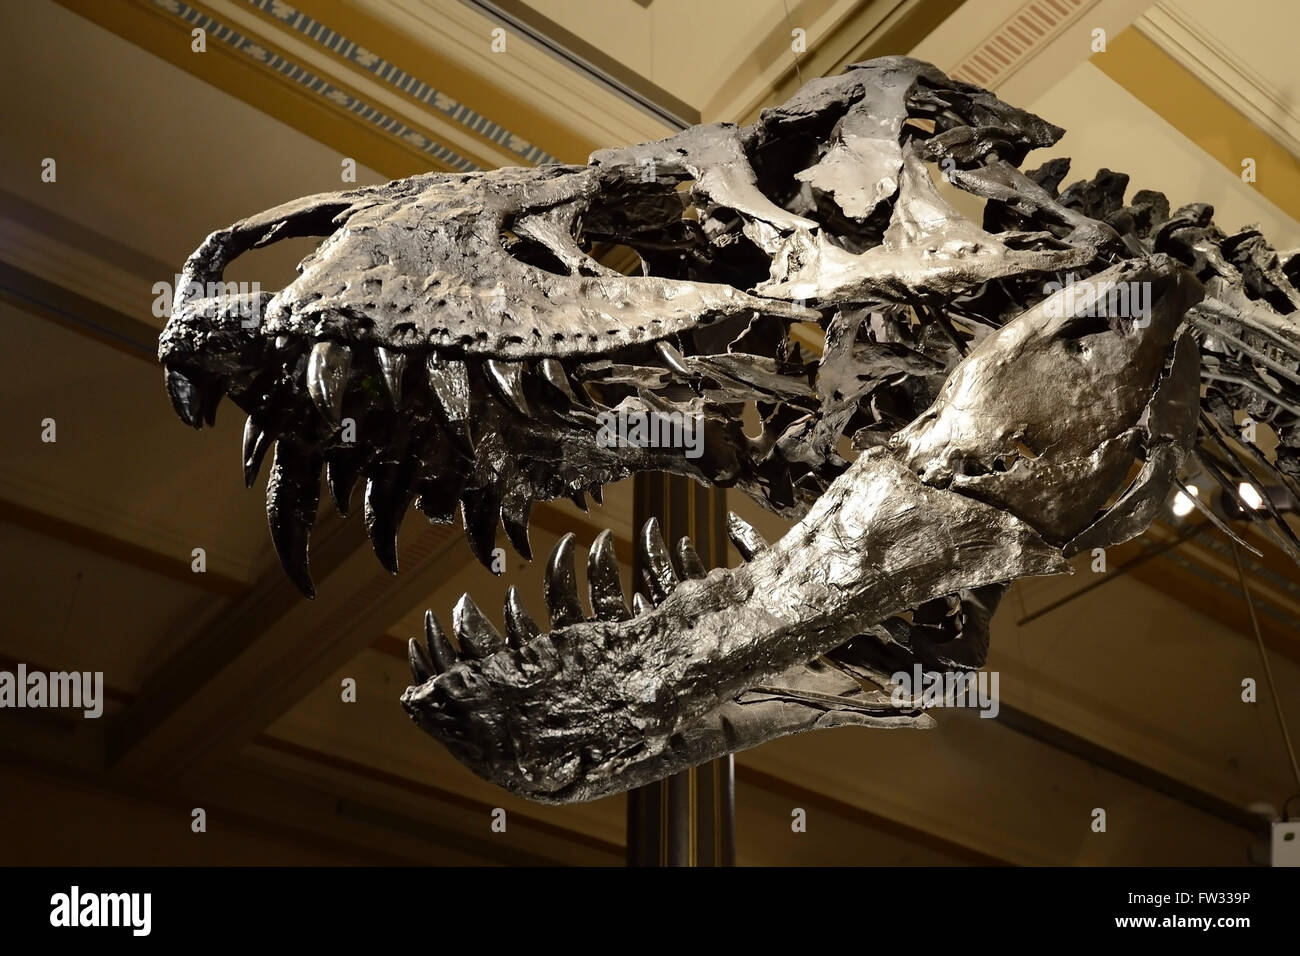 Skull of the until now best preserved skeleton of Tyrannosaurus rex or T.  rex, Tristan Otto, Naturkundemuseum Stock Photo - Alamy